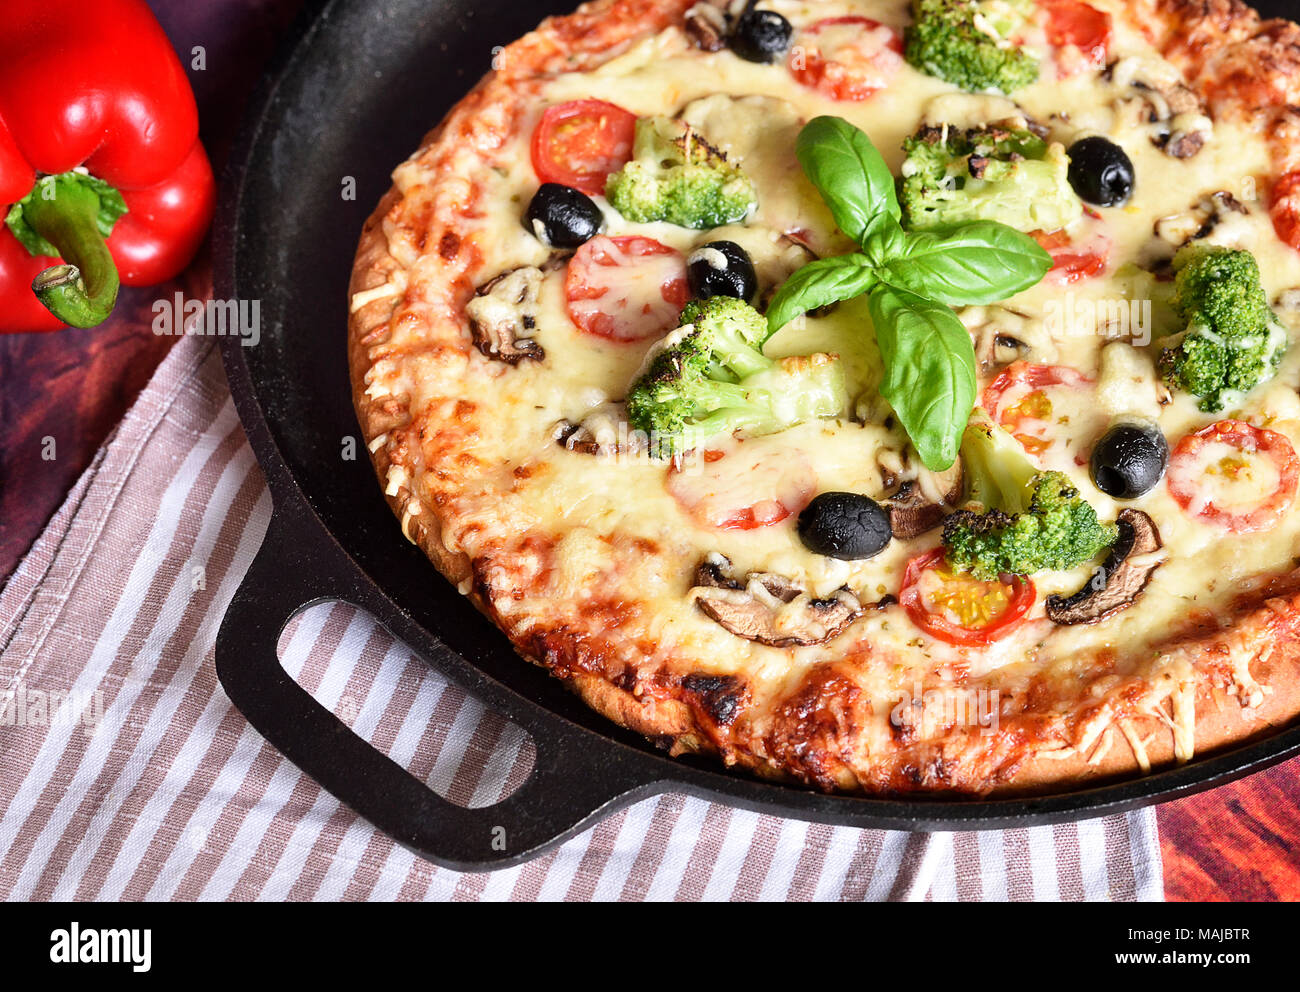 Fresh pizza in a pizza pan. Vegetarian pizza or vegetable pizza with broccoli, tomatoes, mushrooms, olives and cheese. Cheesy pizza, homemade pizza. Stock Photo